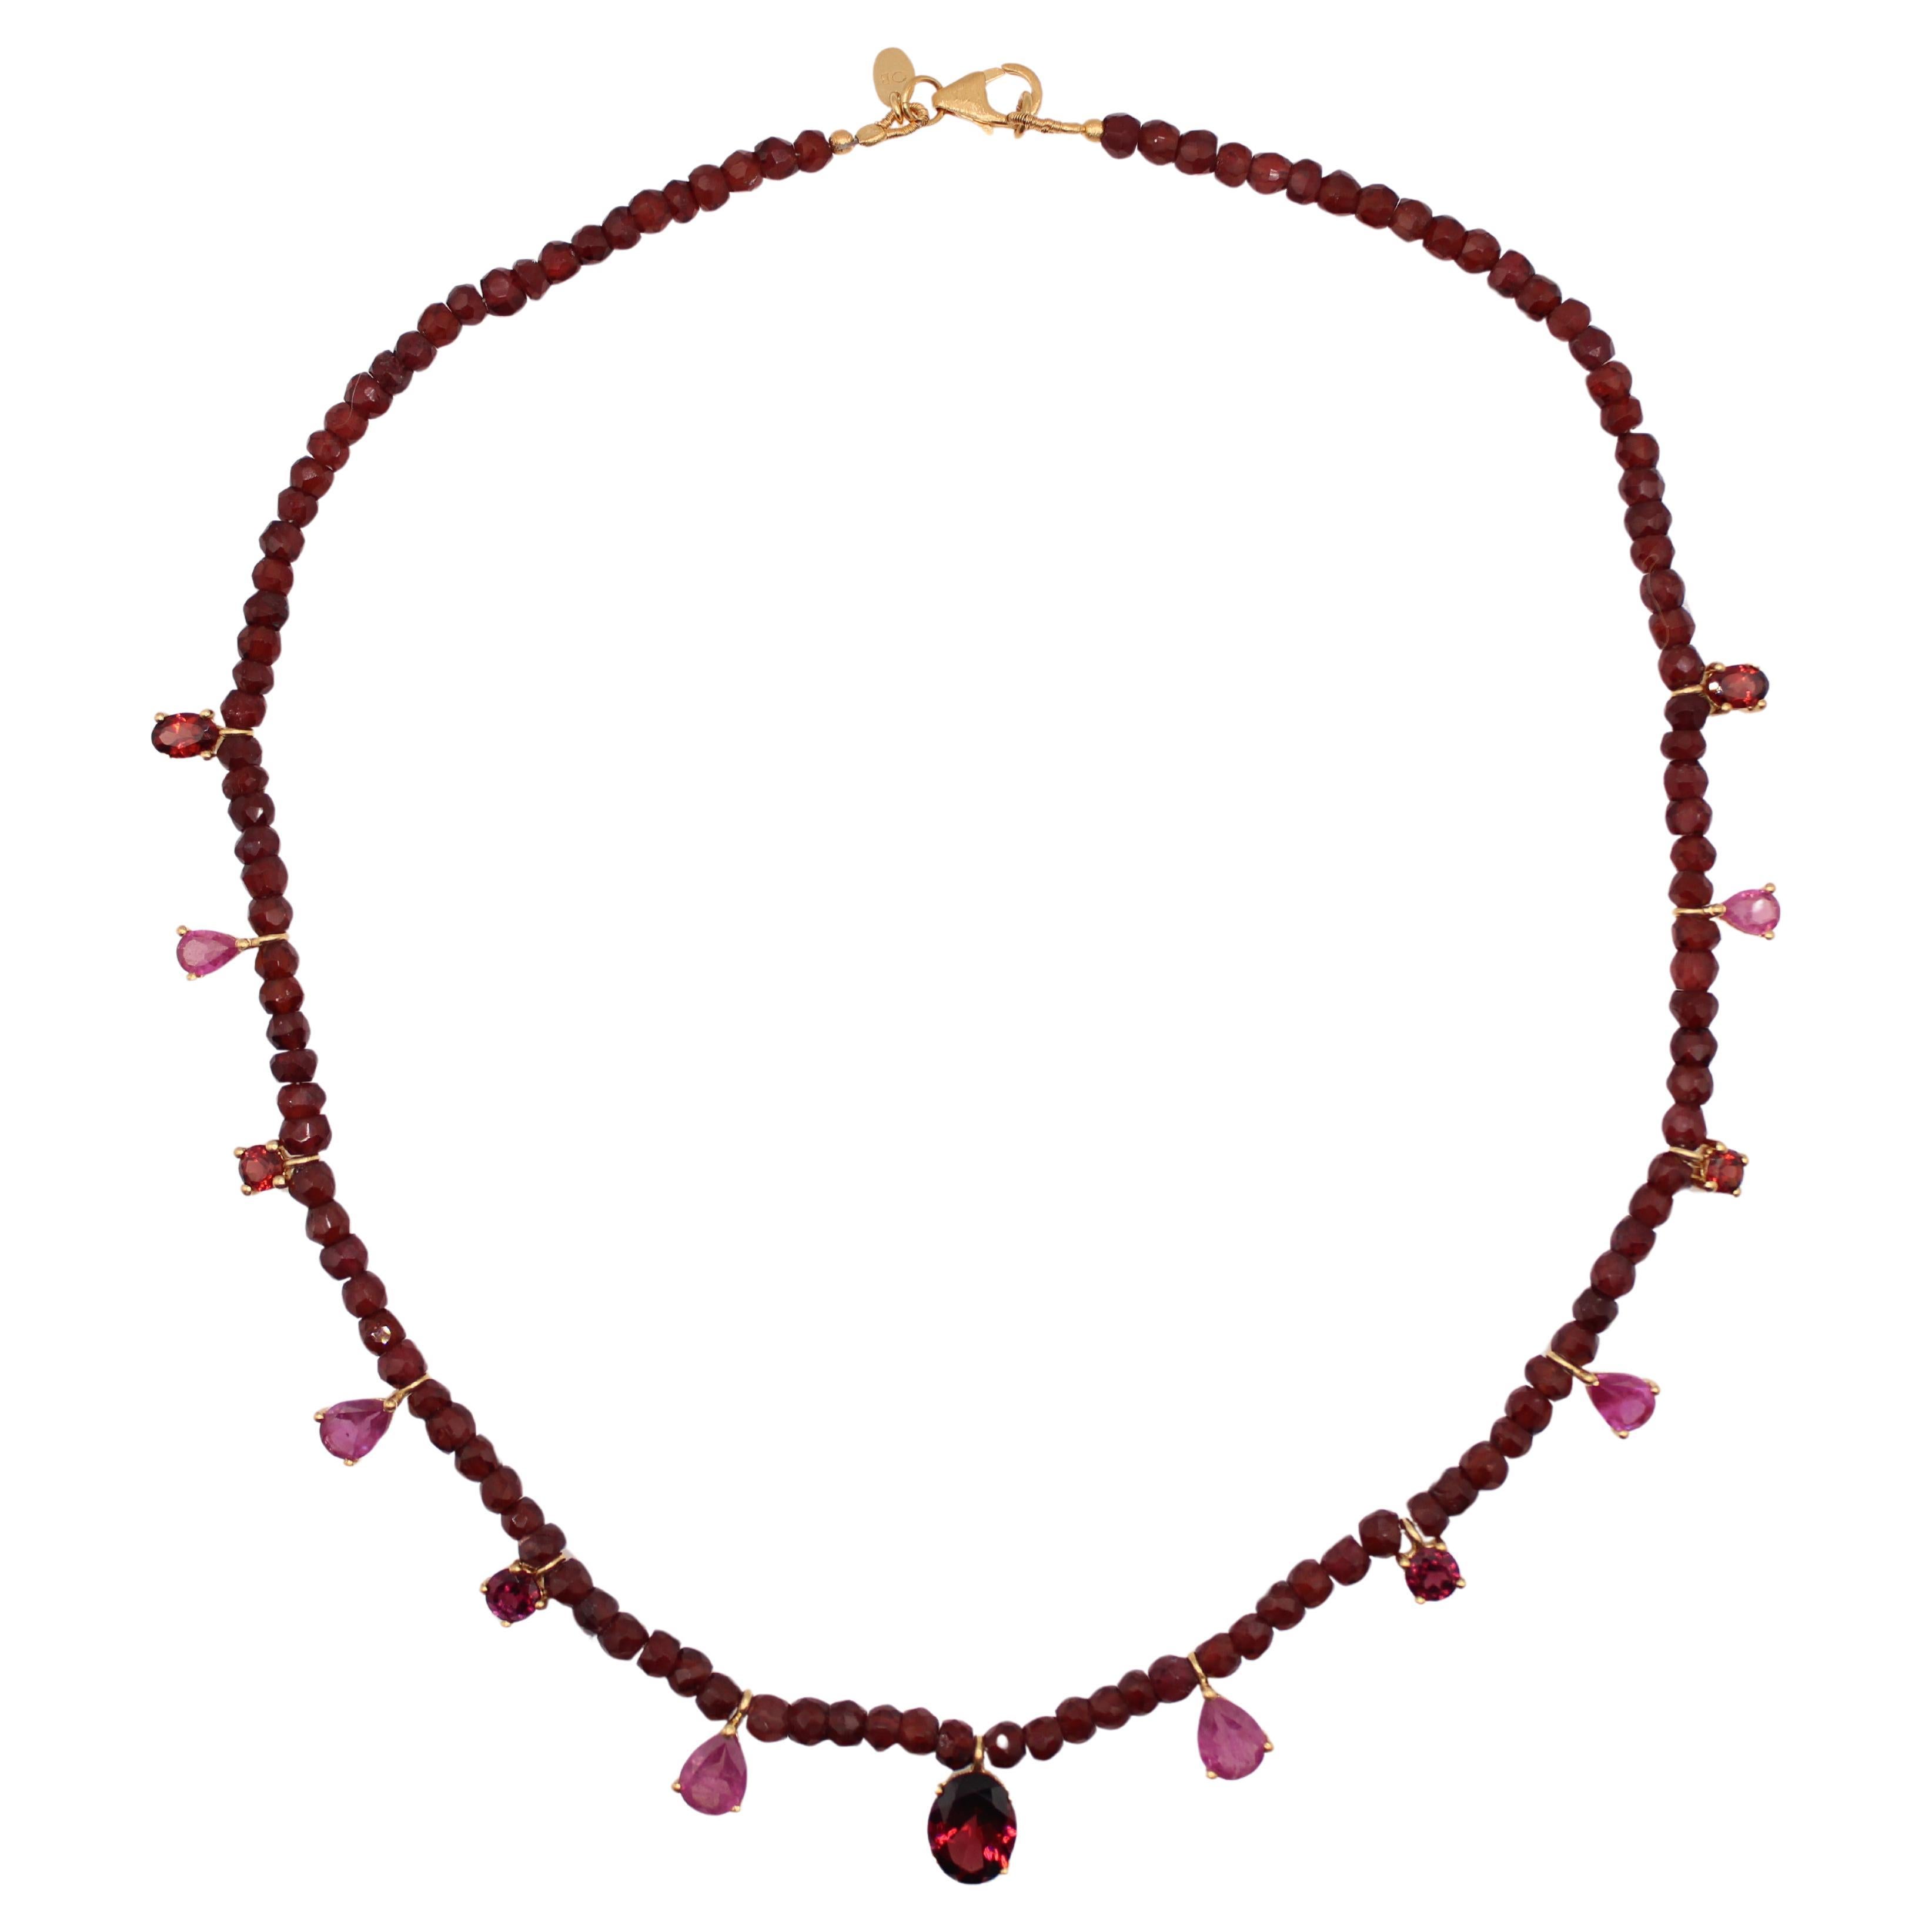 11.17 Carat Ruby and Garnet Gemstone Beaded Necklace  For Sale